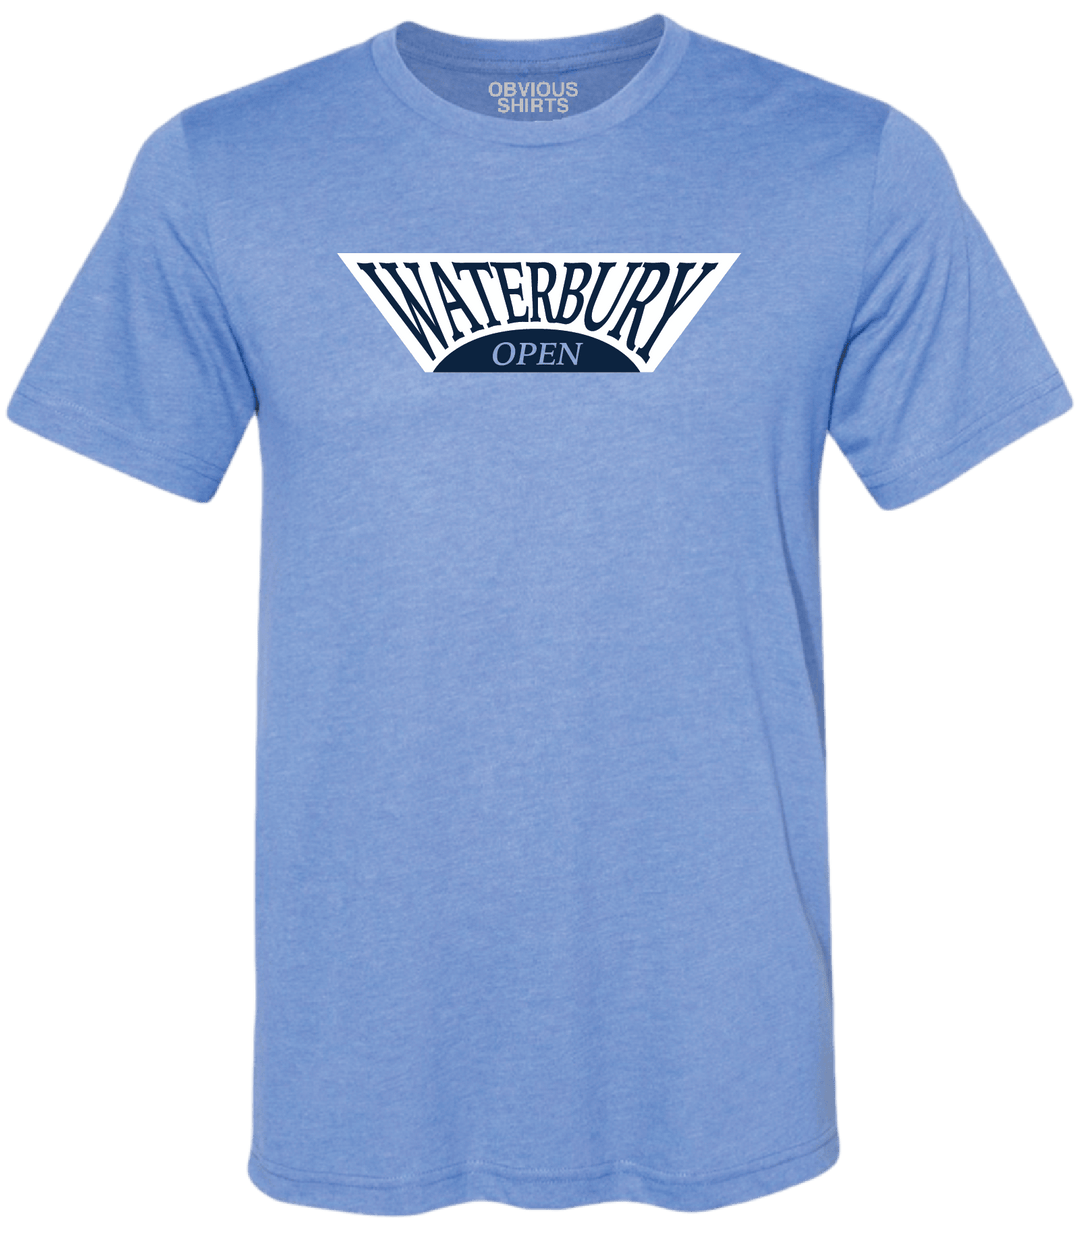 THE WATERBURY OPEN - OBVIOUS SHIRTS